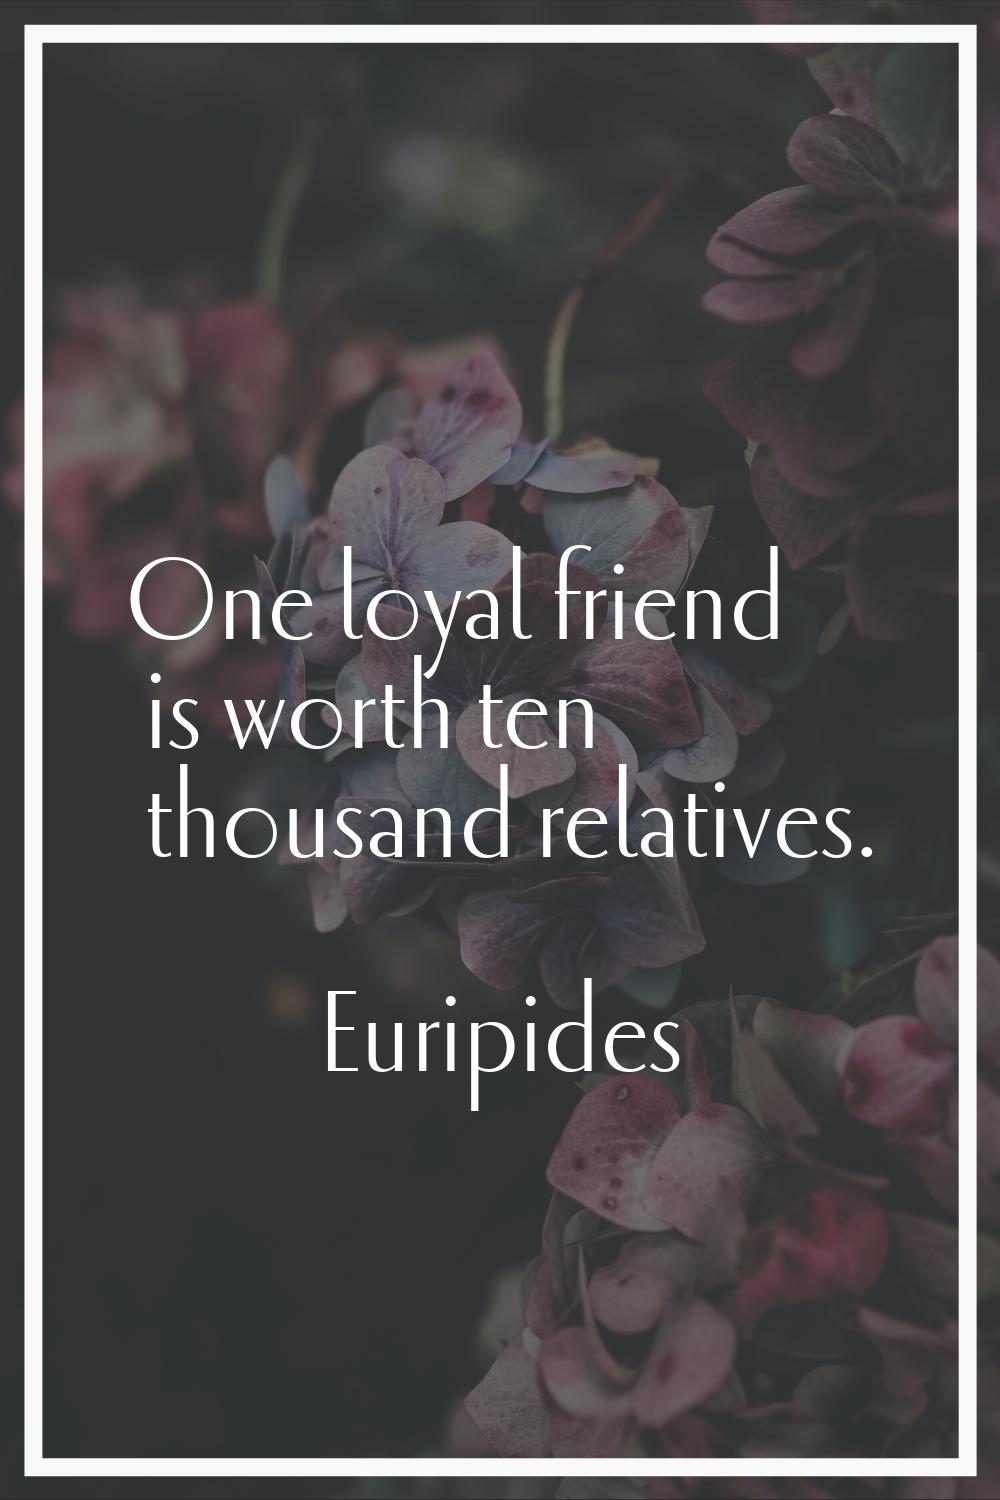 One loyal friend is worth ten thousand relatives.